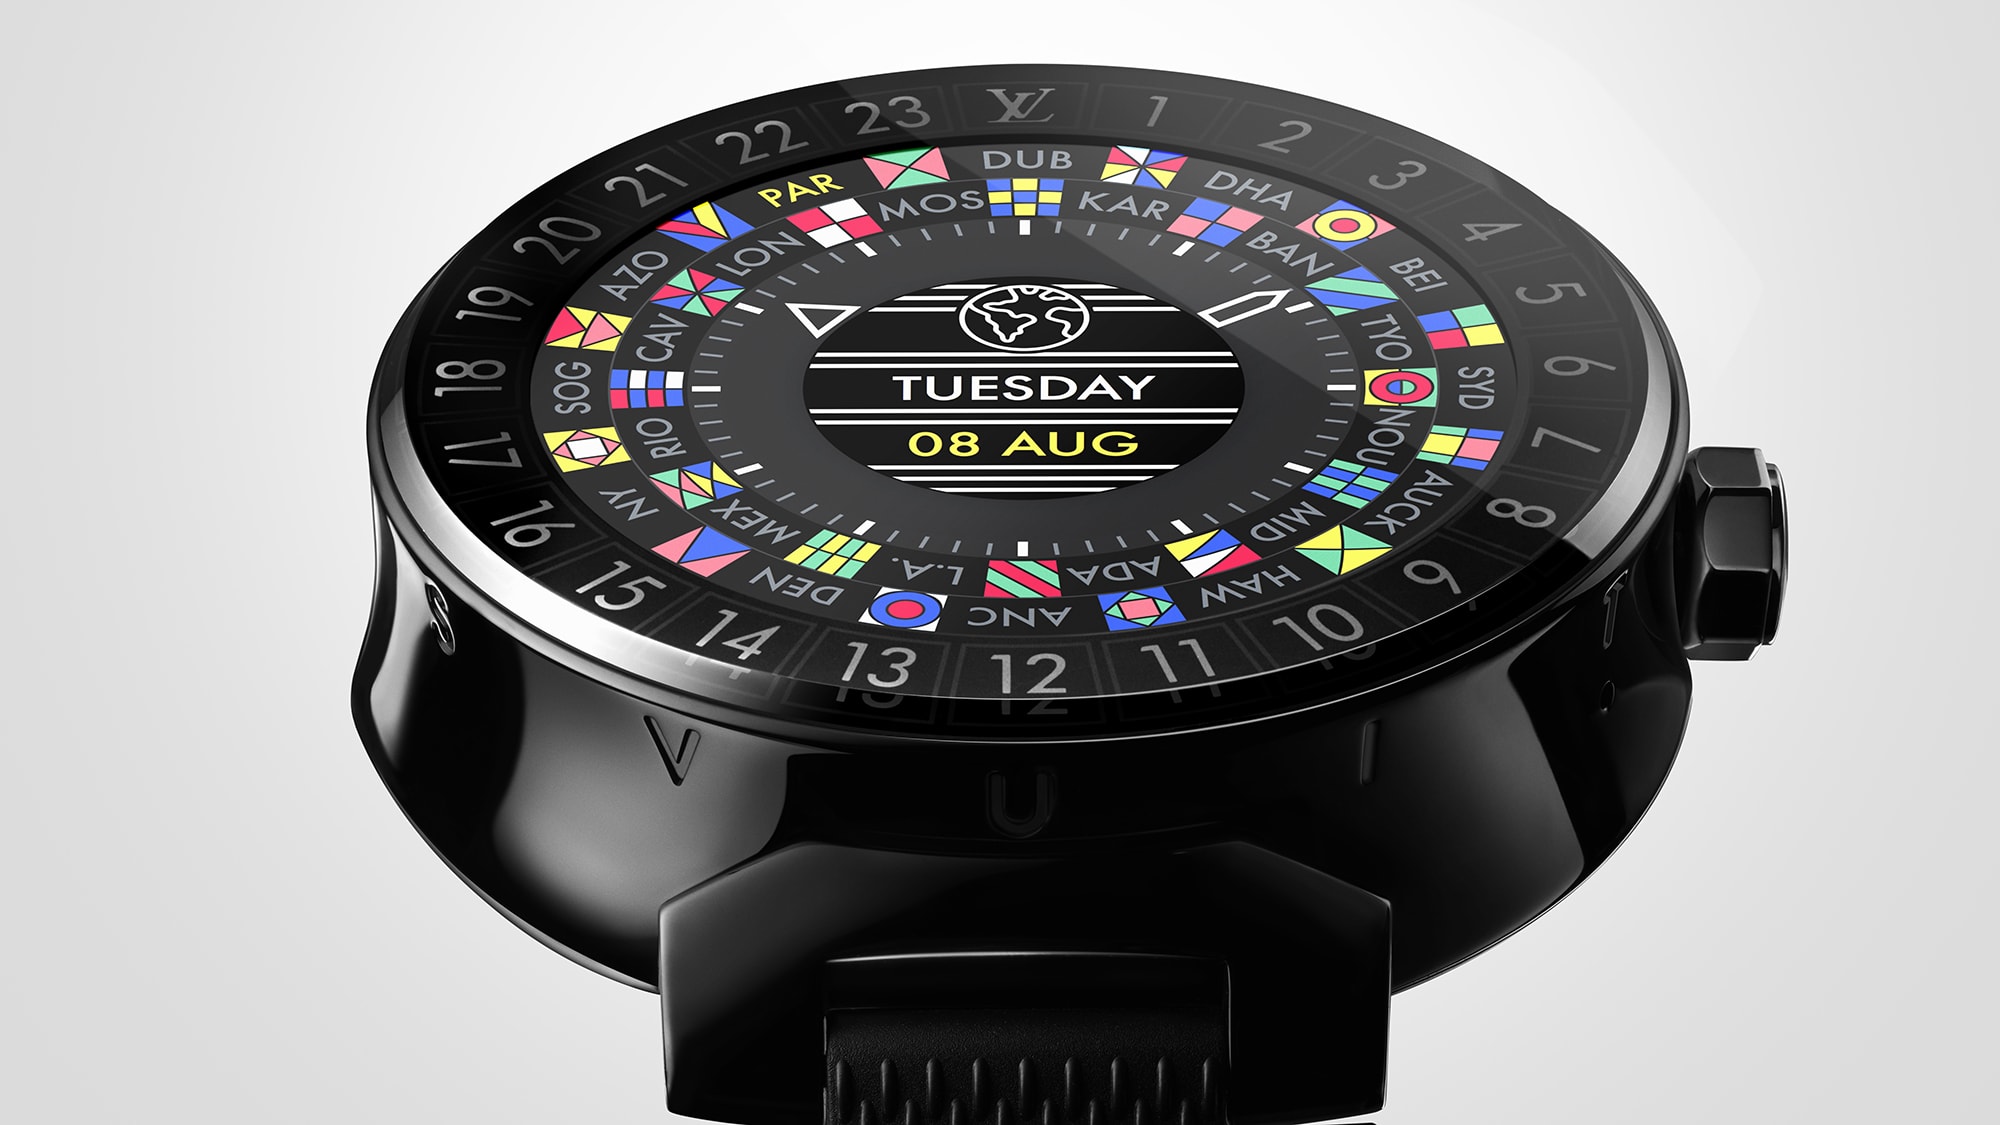 Louis Vuitton made a $3,000 Android Wear smartwatch | Engadget